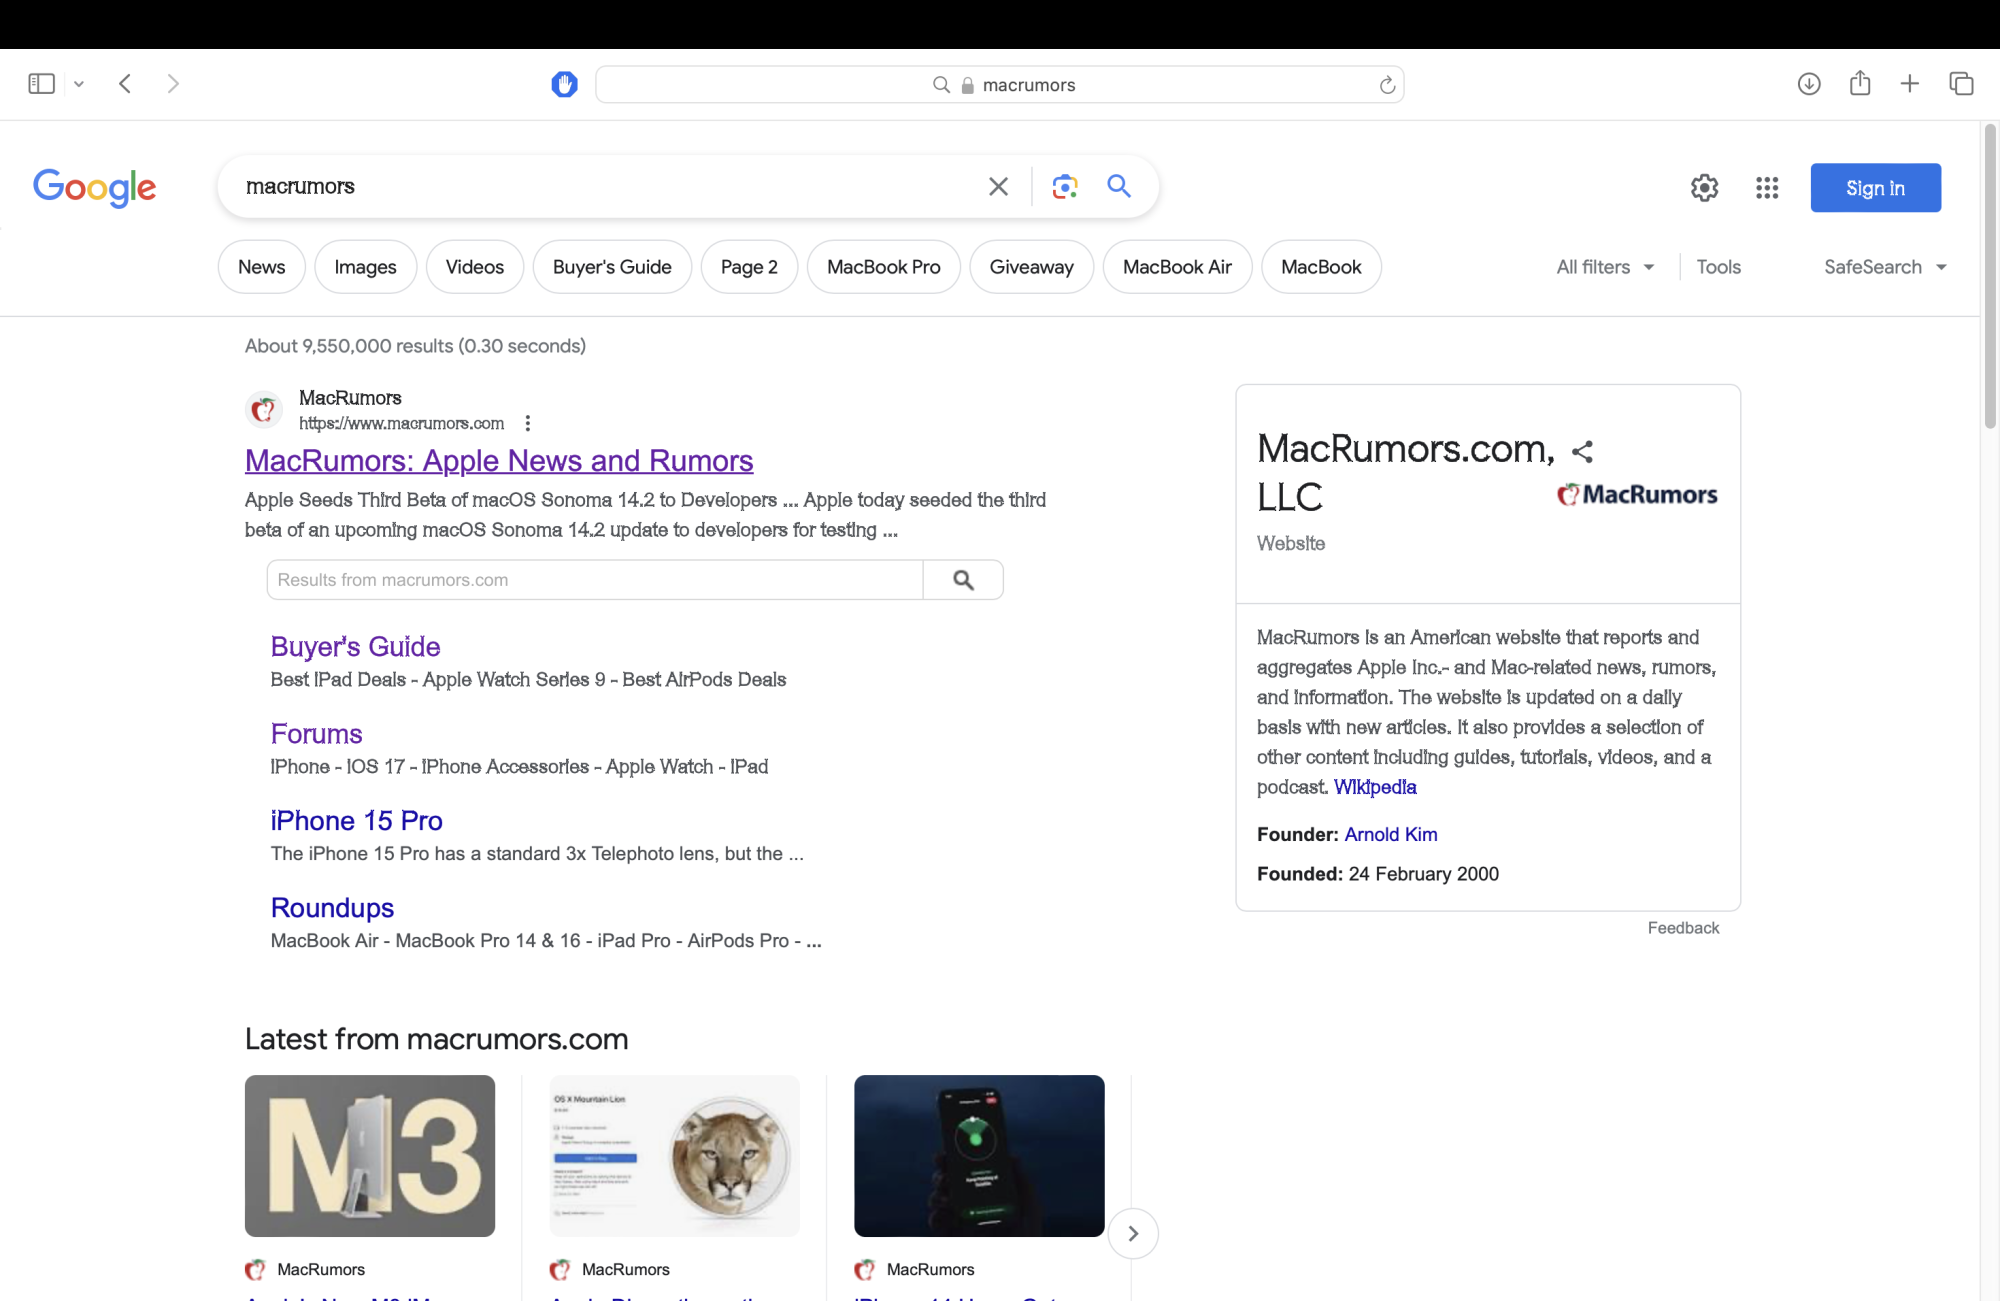 Google Search results fonts are rendering weird - Google Search Community